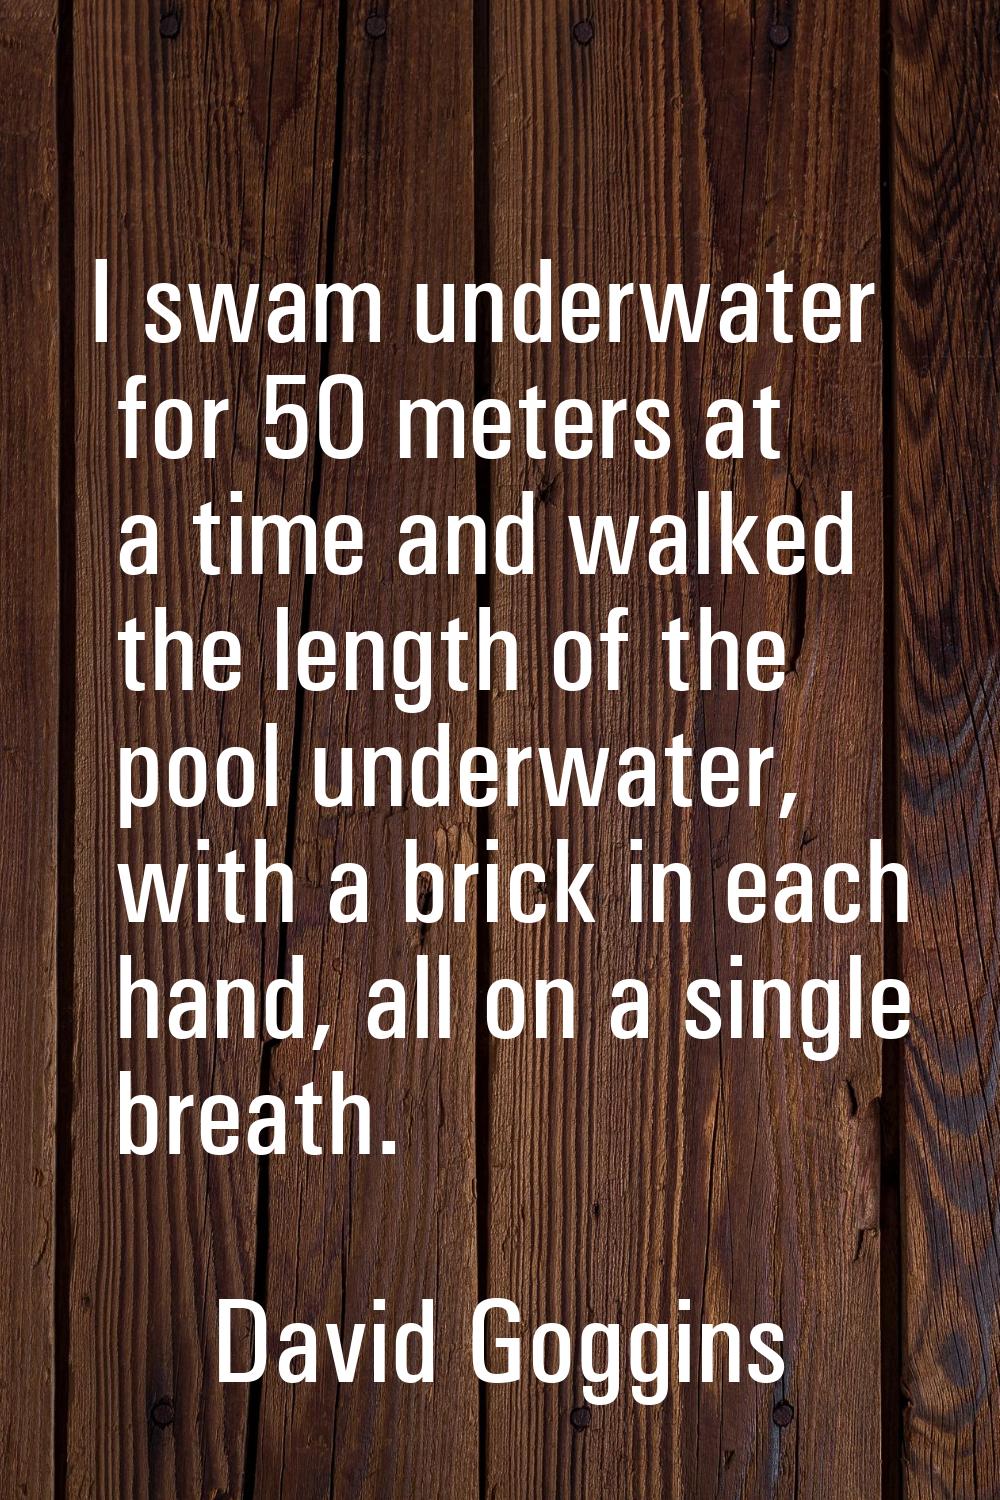 I swam underwater for 50 meters at a time and walked the length of the pool underwater, with a bric